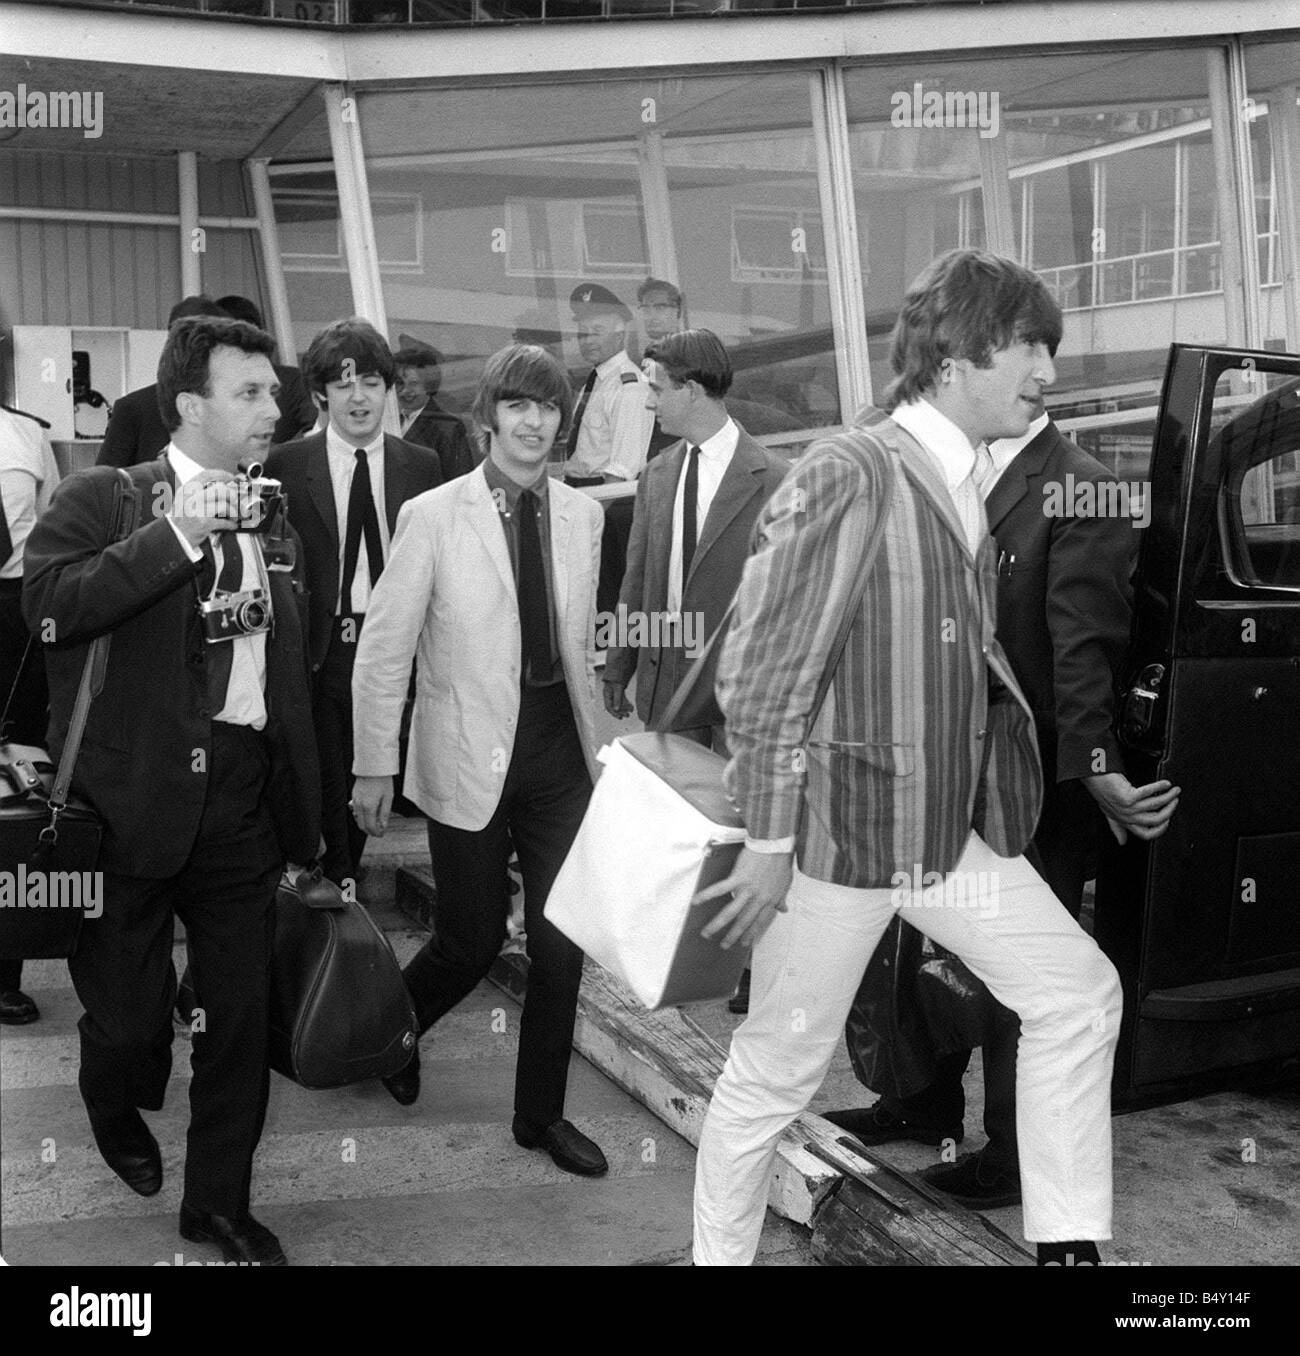 Pop Group The Beatles July 1964 John Lennon Paul McCartney George Harrison  Ringo Starr the beatles at London Airport after returning home from  performing in Stockholm Sweden Stock Photo - Alamy